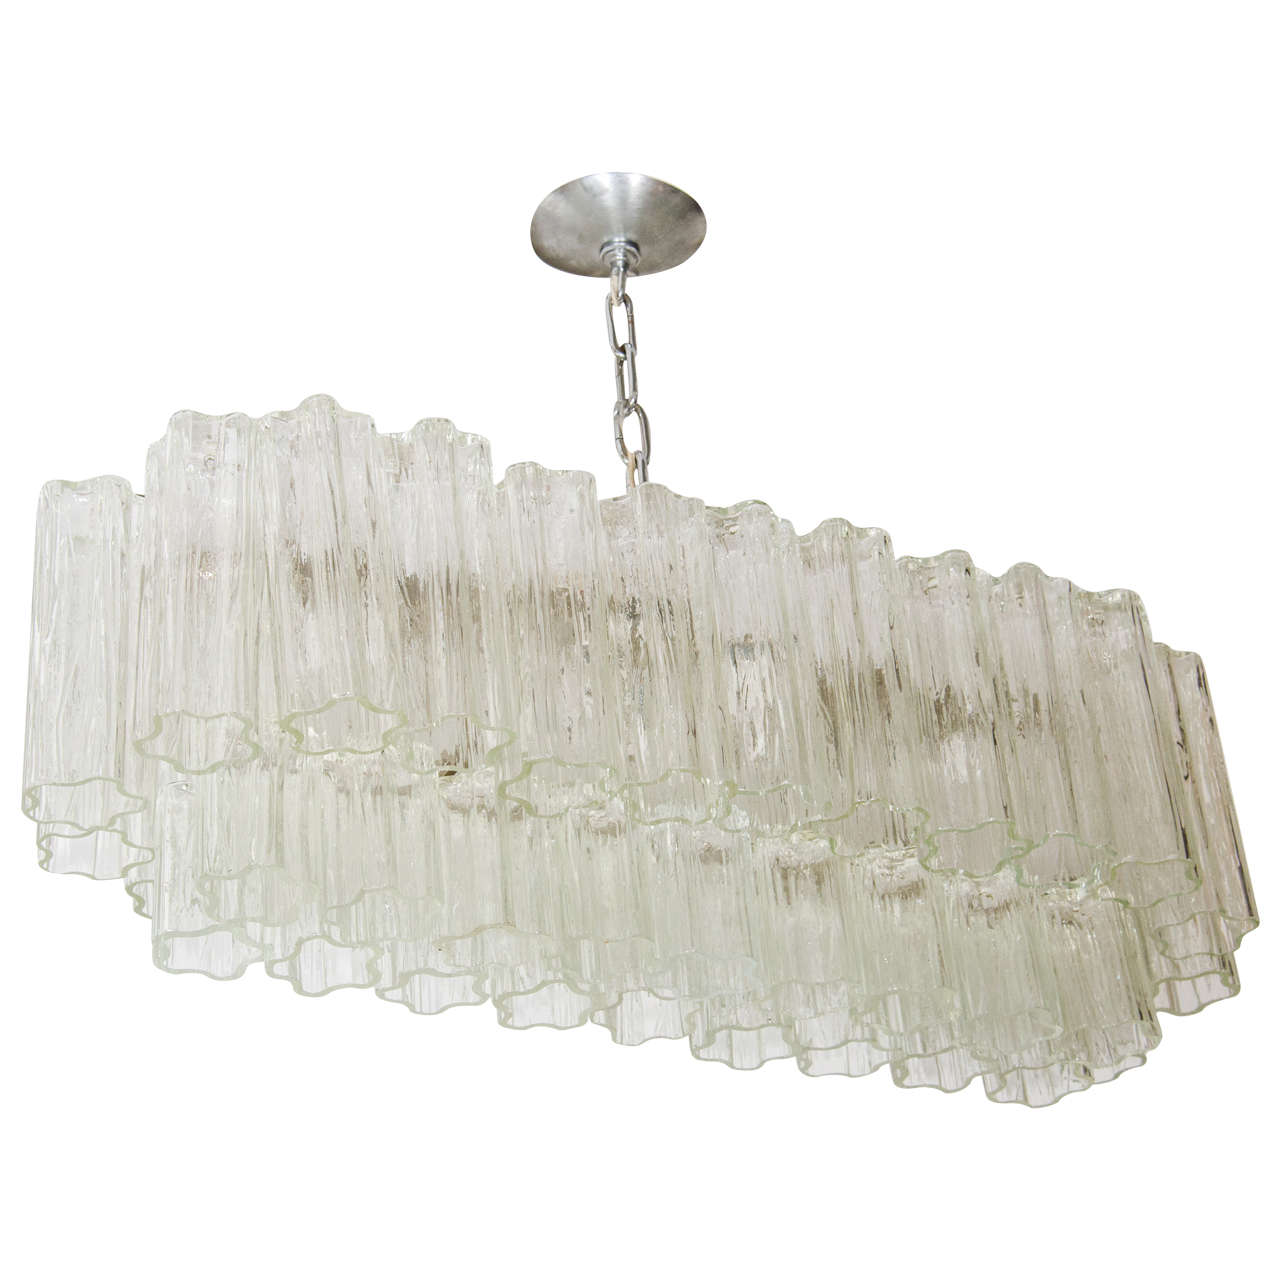 Superb Murano Tronci Glass Chandelier For Sale